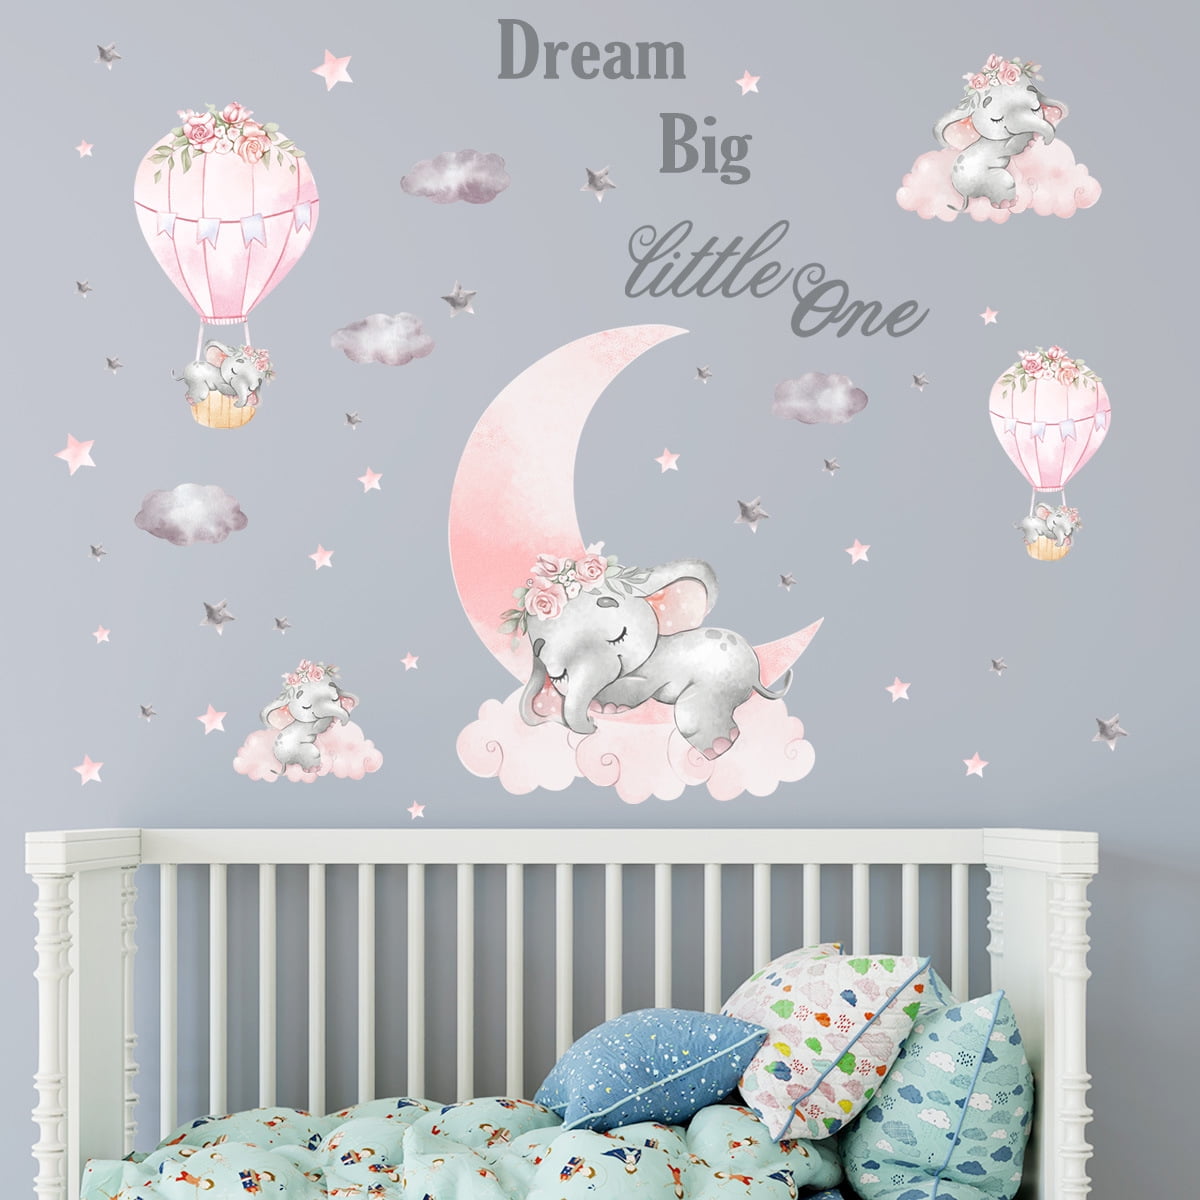 Removable Wall Stickers Nursery Girls Pink Hot Air Balloons Love Heart Decor DIY 